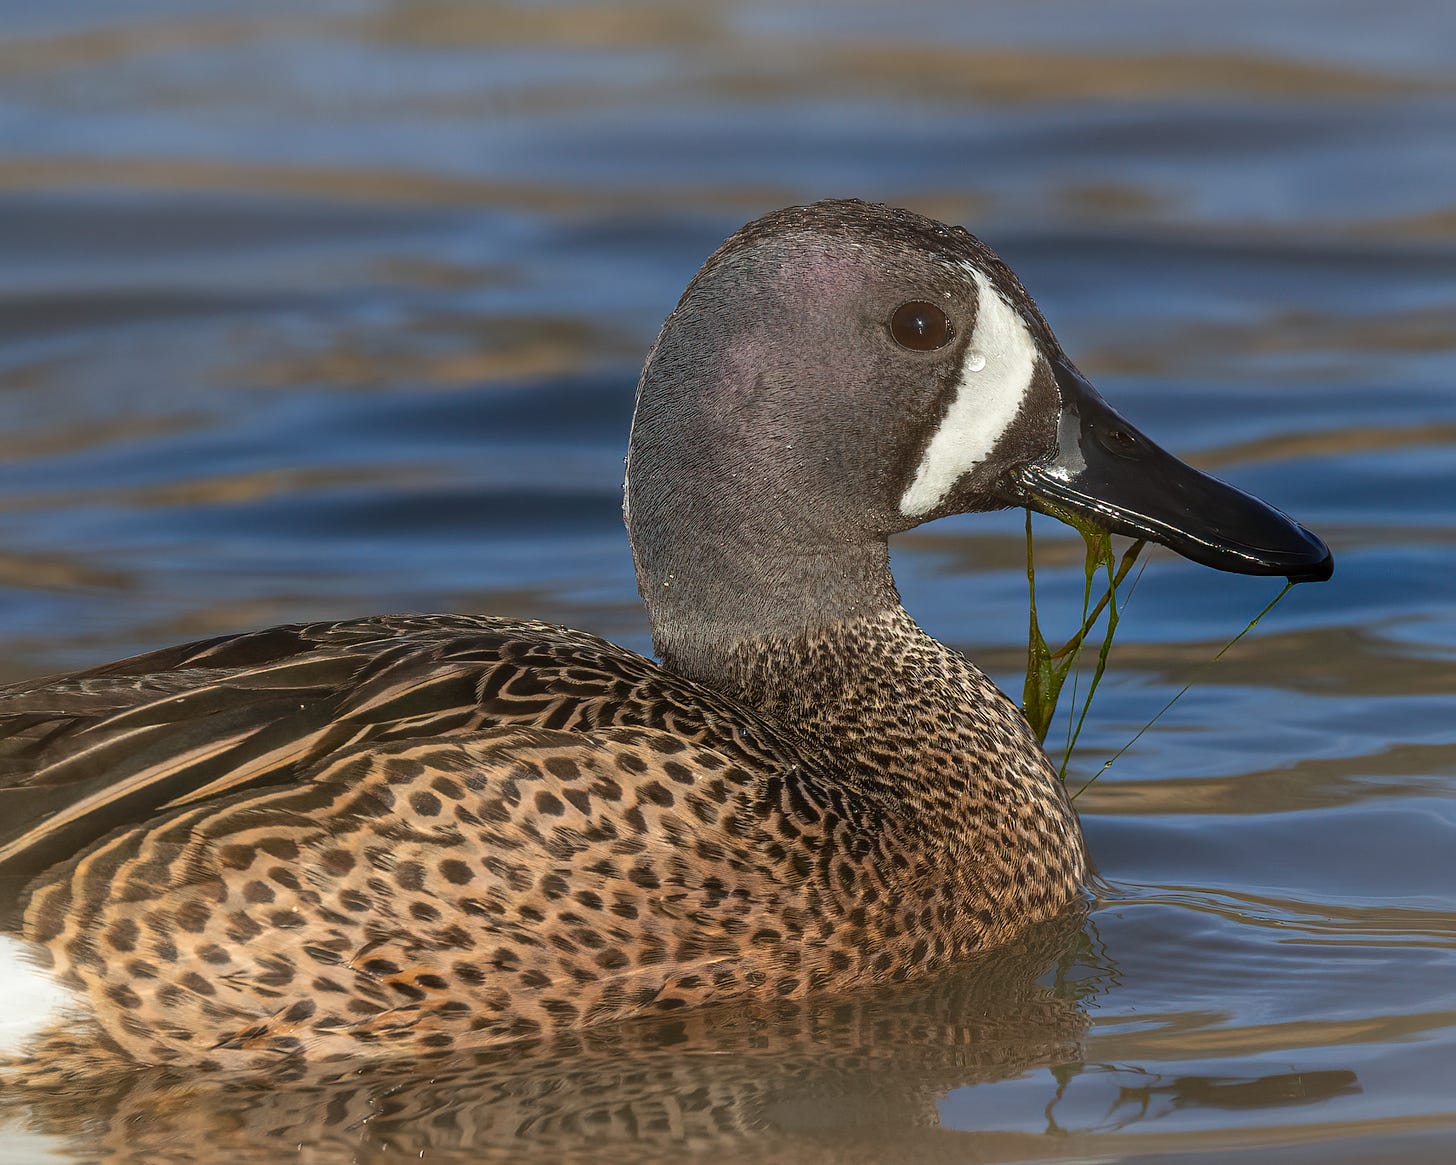 A male blue winged teal floats on the water with algae dripping out of his mouth. He has a gray head with a bold white crescent shape across his cheek. His body feathers are brown with dark brown speckles.